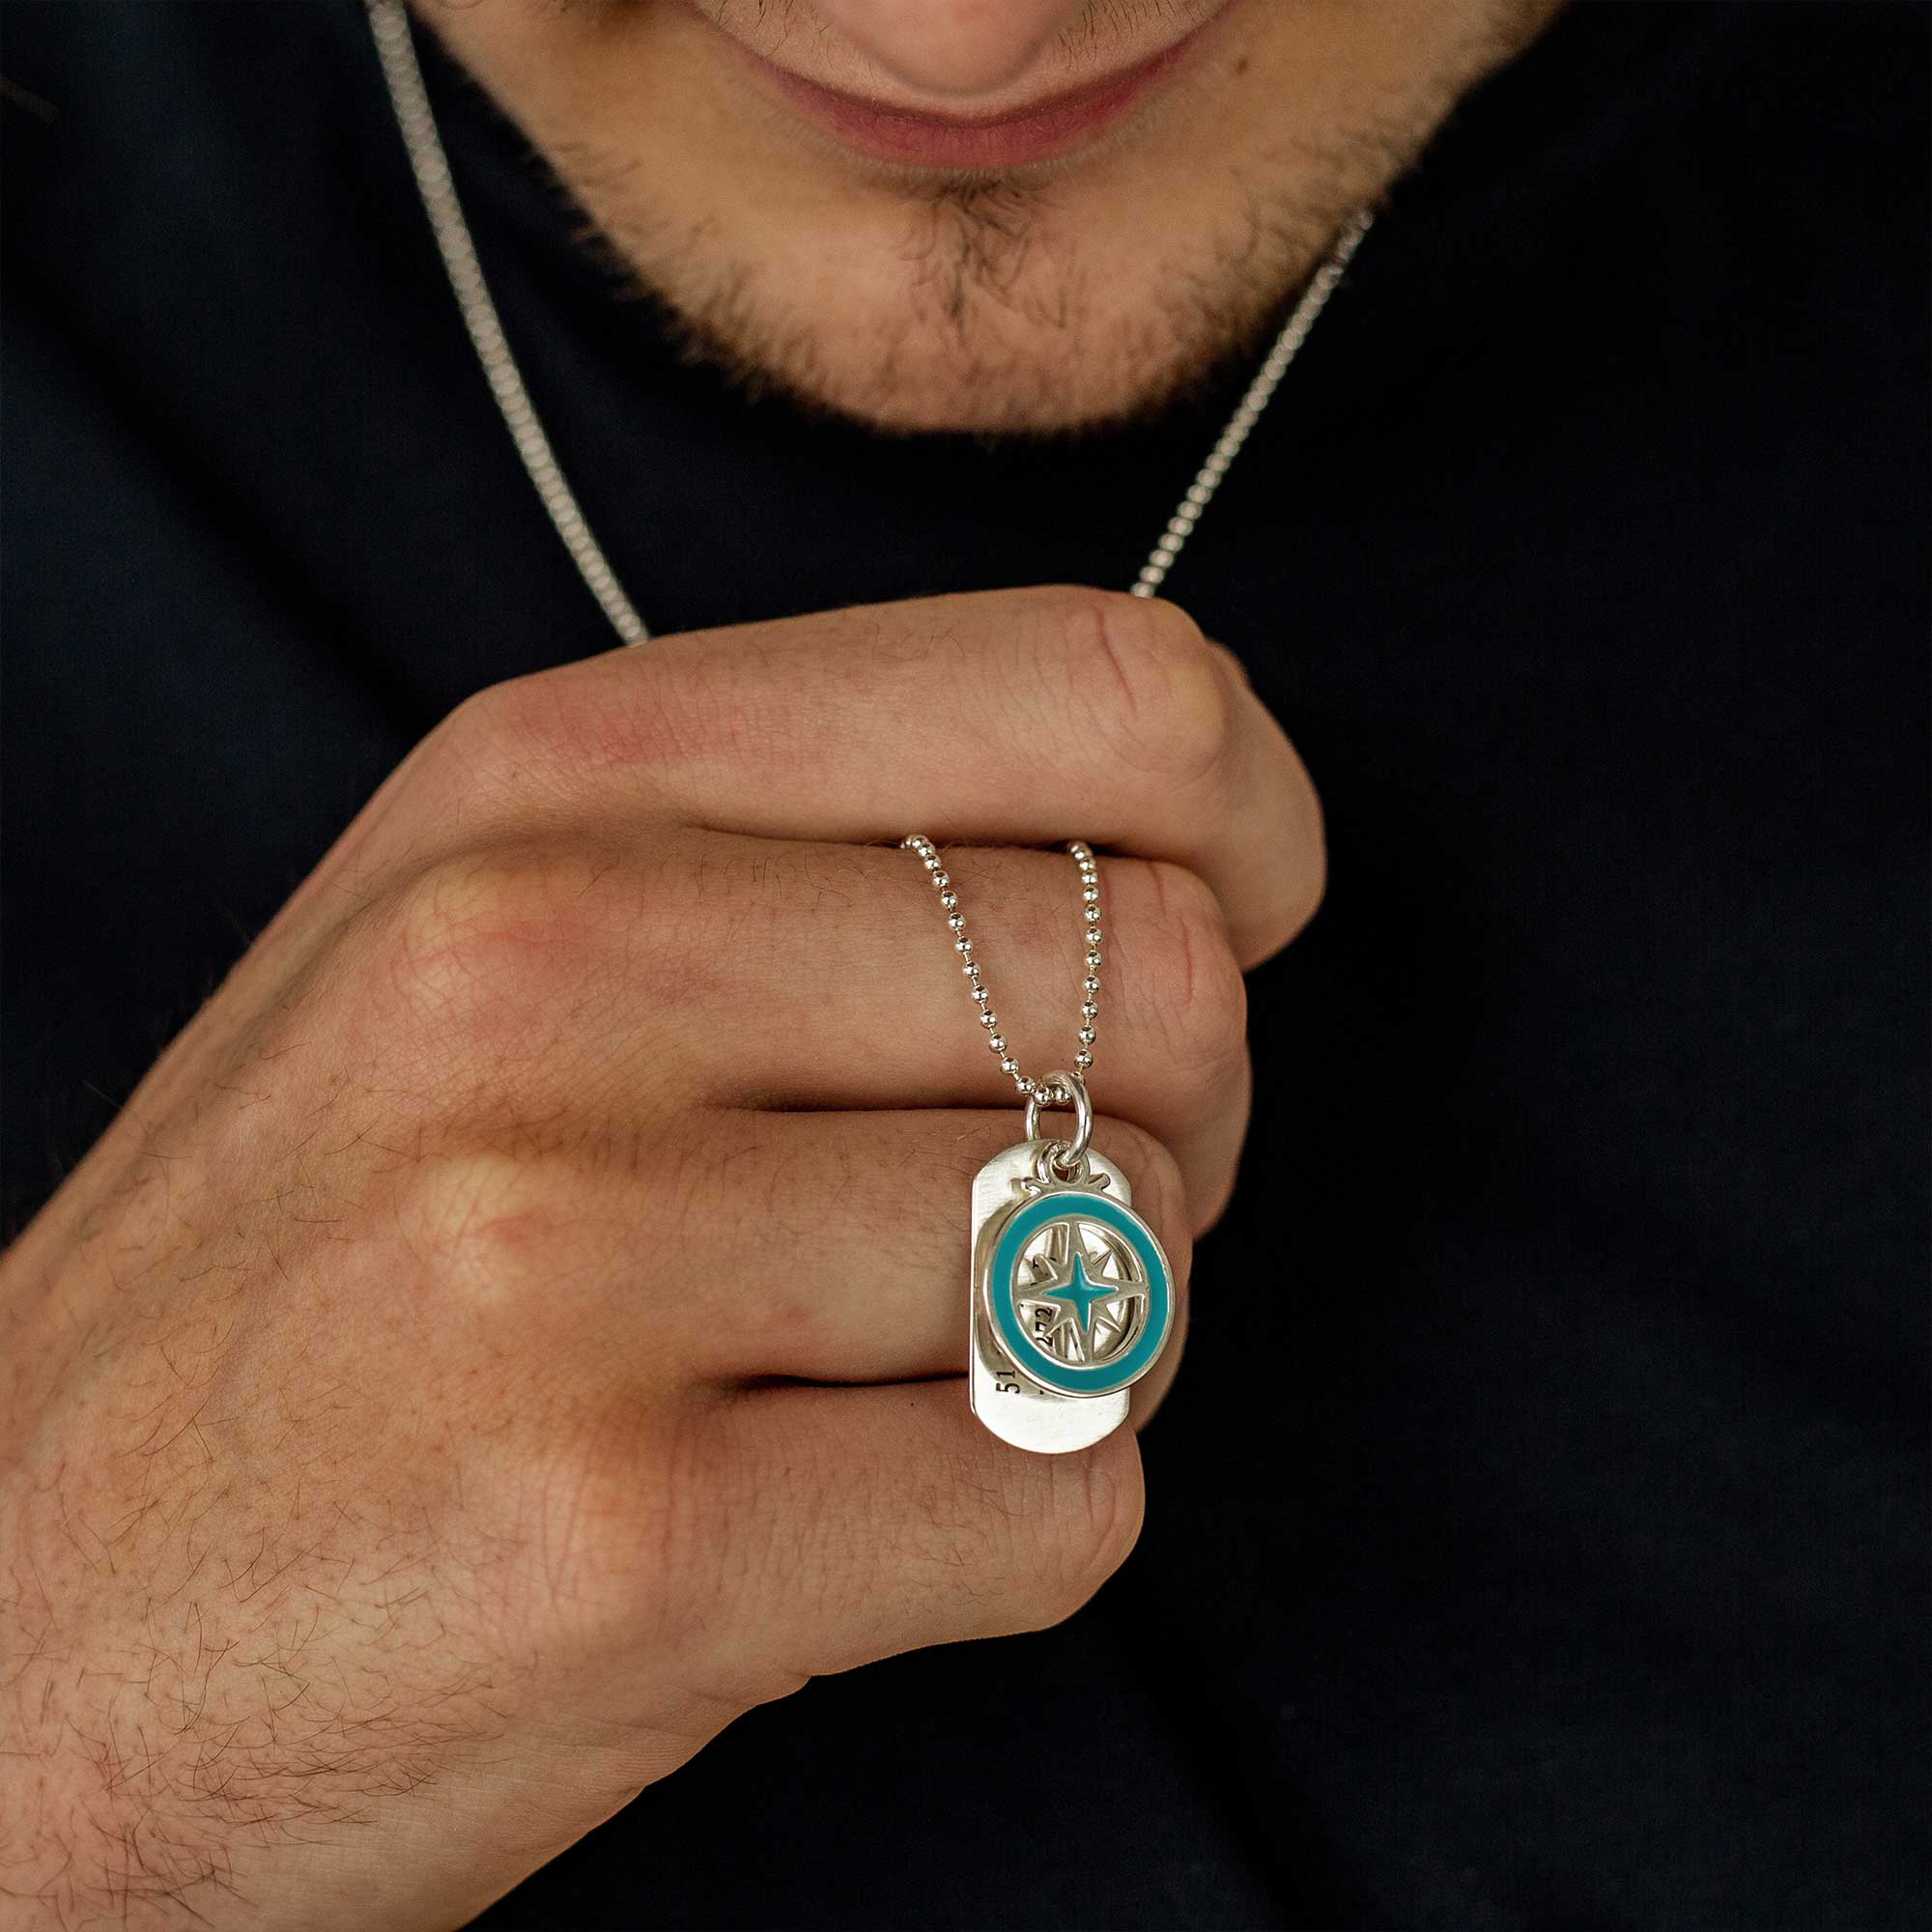 dog tag with travel coordinates engraved with compass enamel pendant mens gift necklace